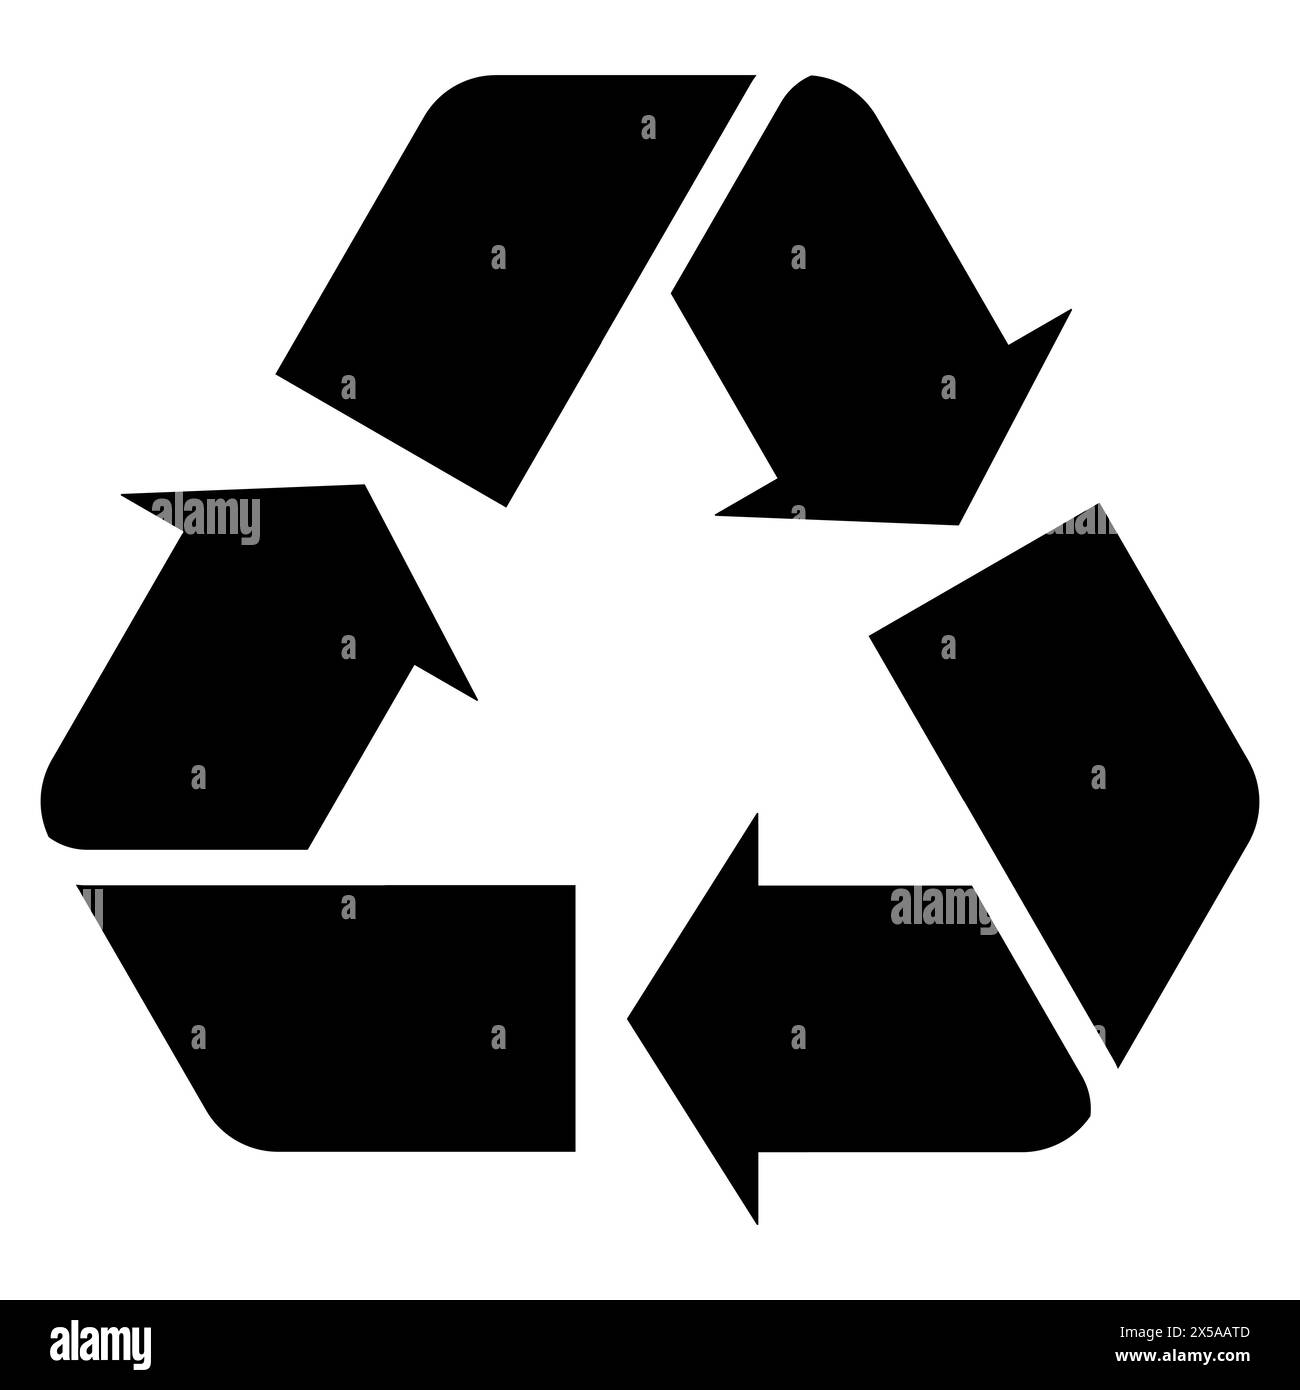 Recycle symbol icon sleek and modern black flat vector icon representing the universal recycling symbol. This minimalist design is perfect Stock Vector